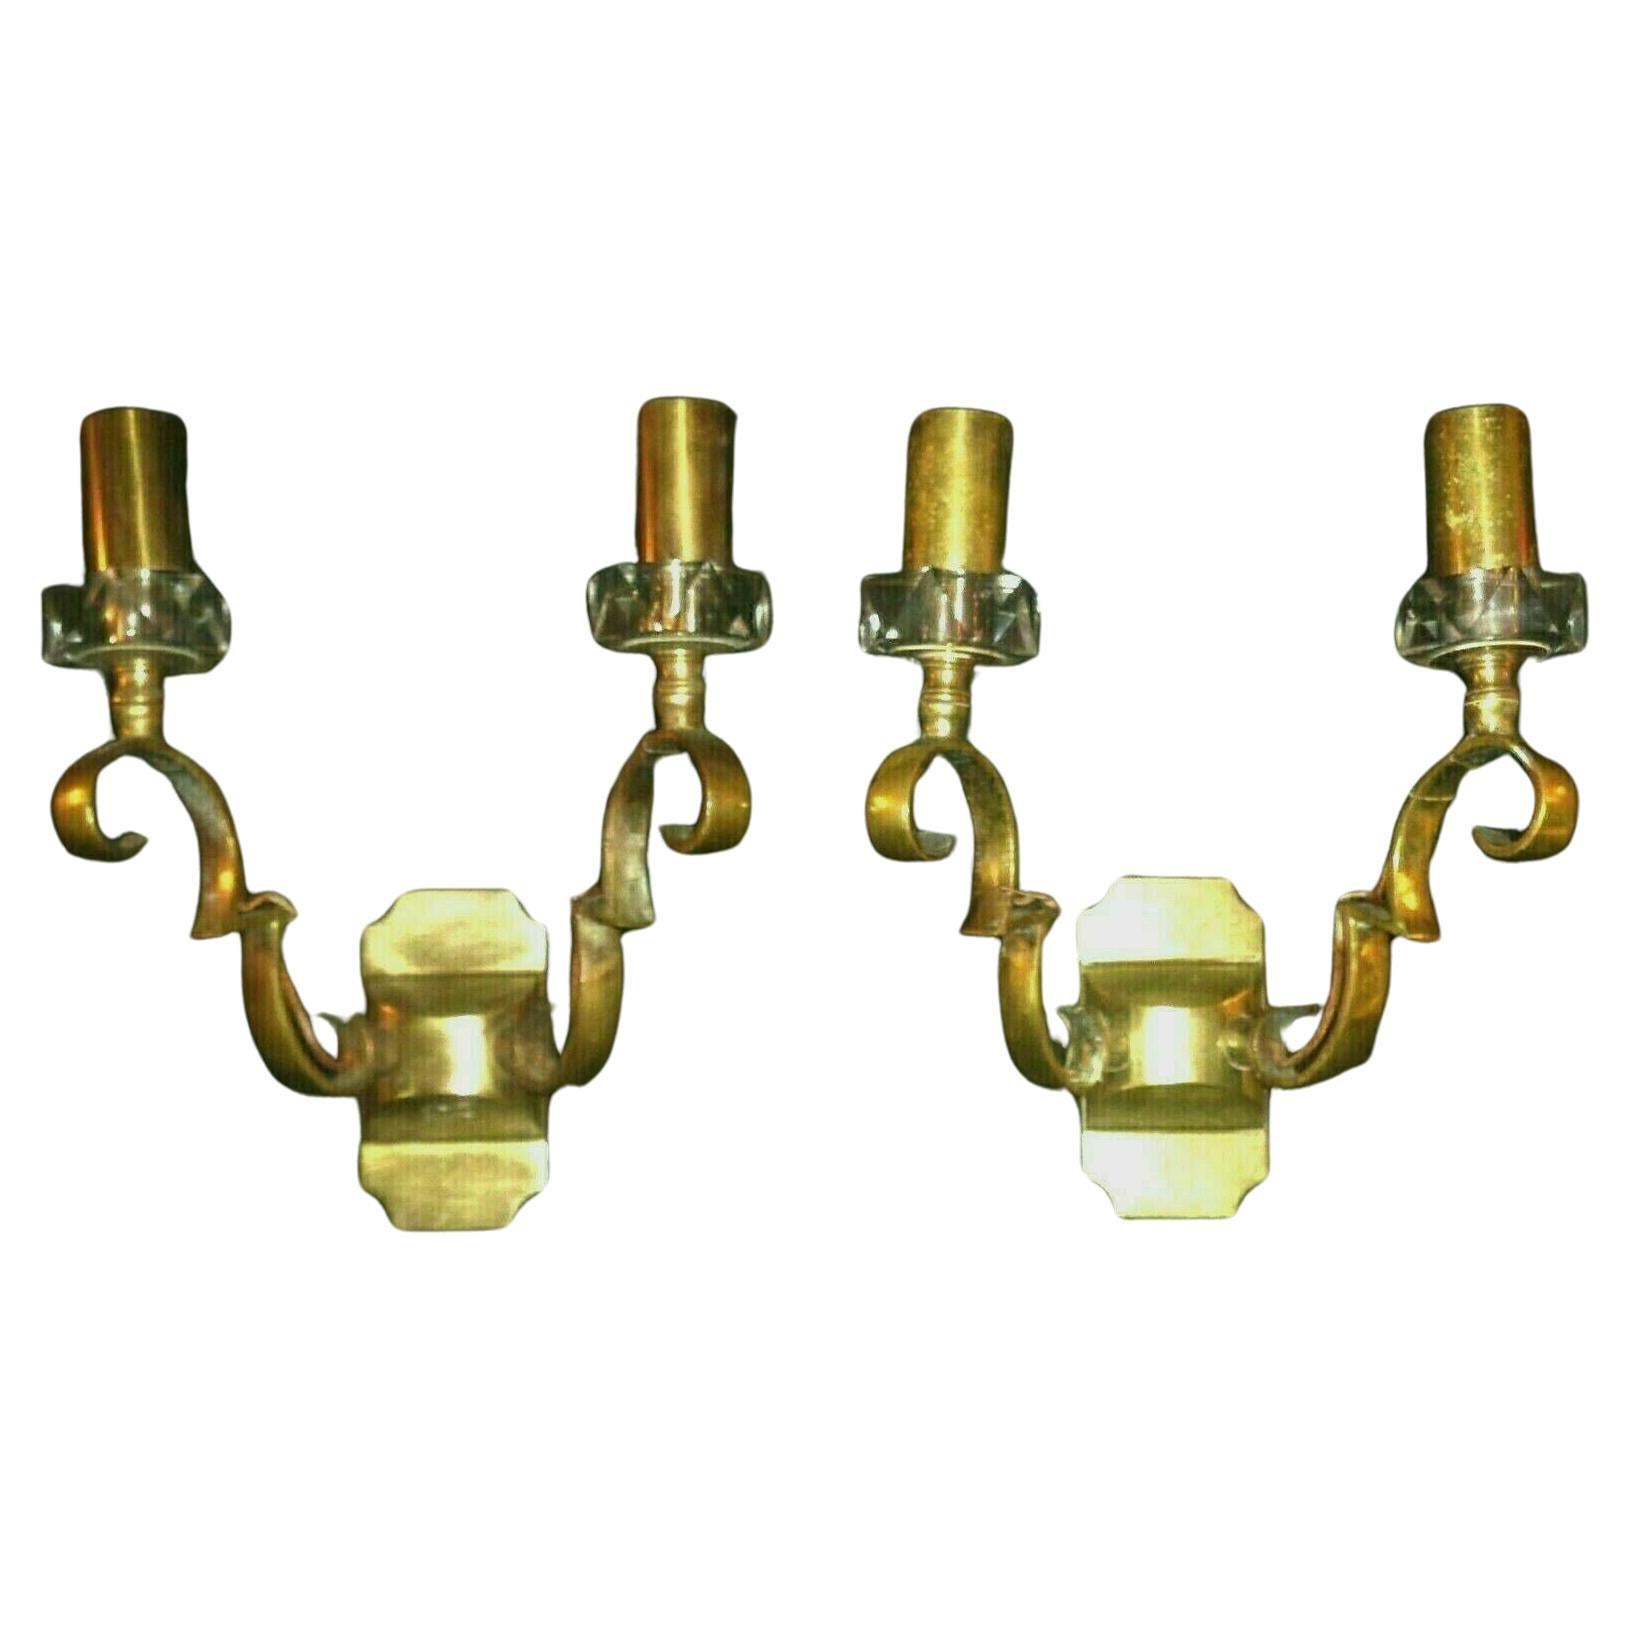 Rare Pair of French Art Deco Gilt Bronze w/ Crystal Wall Sconces Documented and made by Jules Leleu. The crystal was manufactured by Baccarat as Baccarat made the crystal for Leleu's high end lighting pieces. This exact pair is documented in the